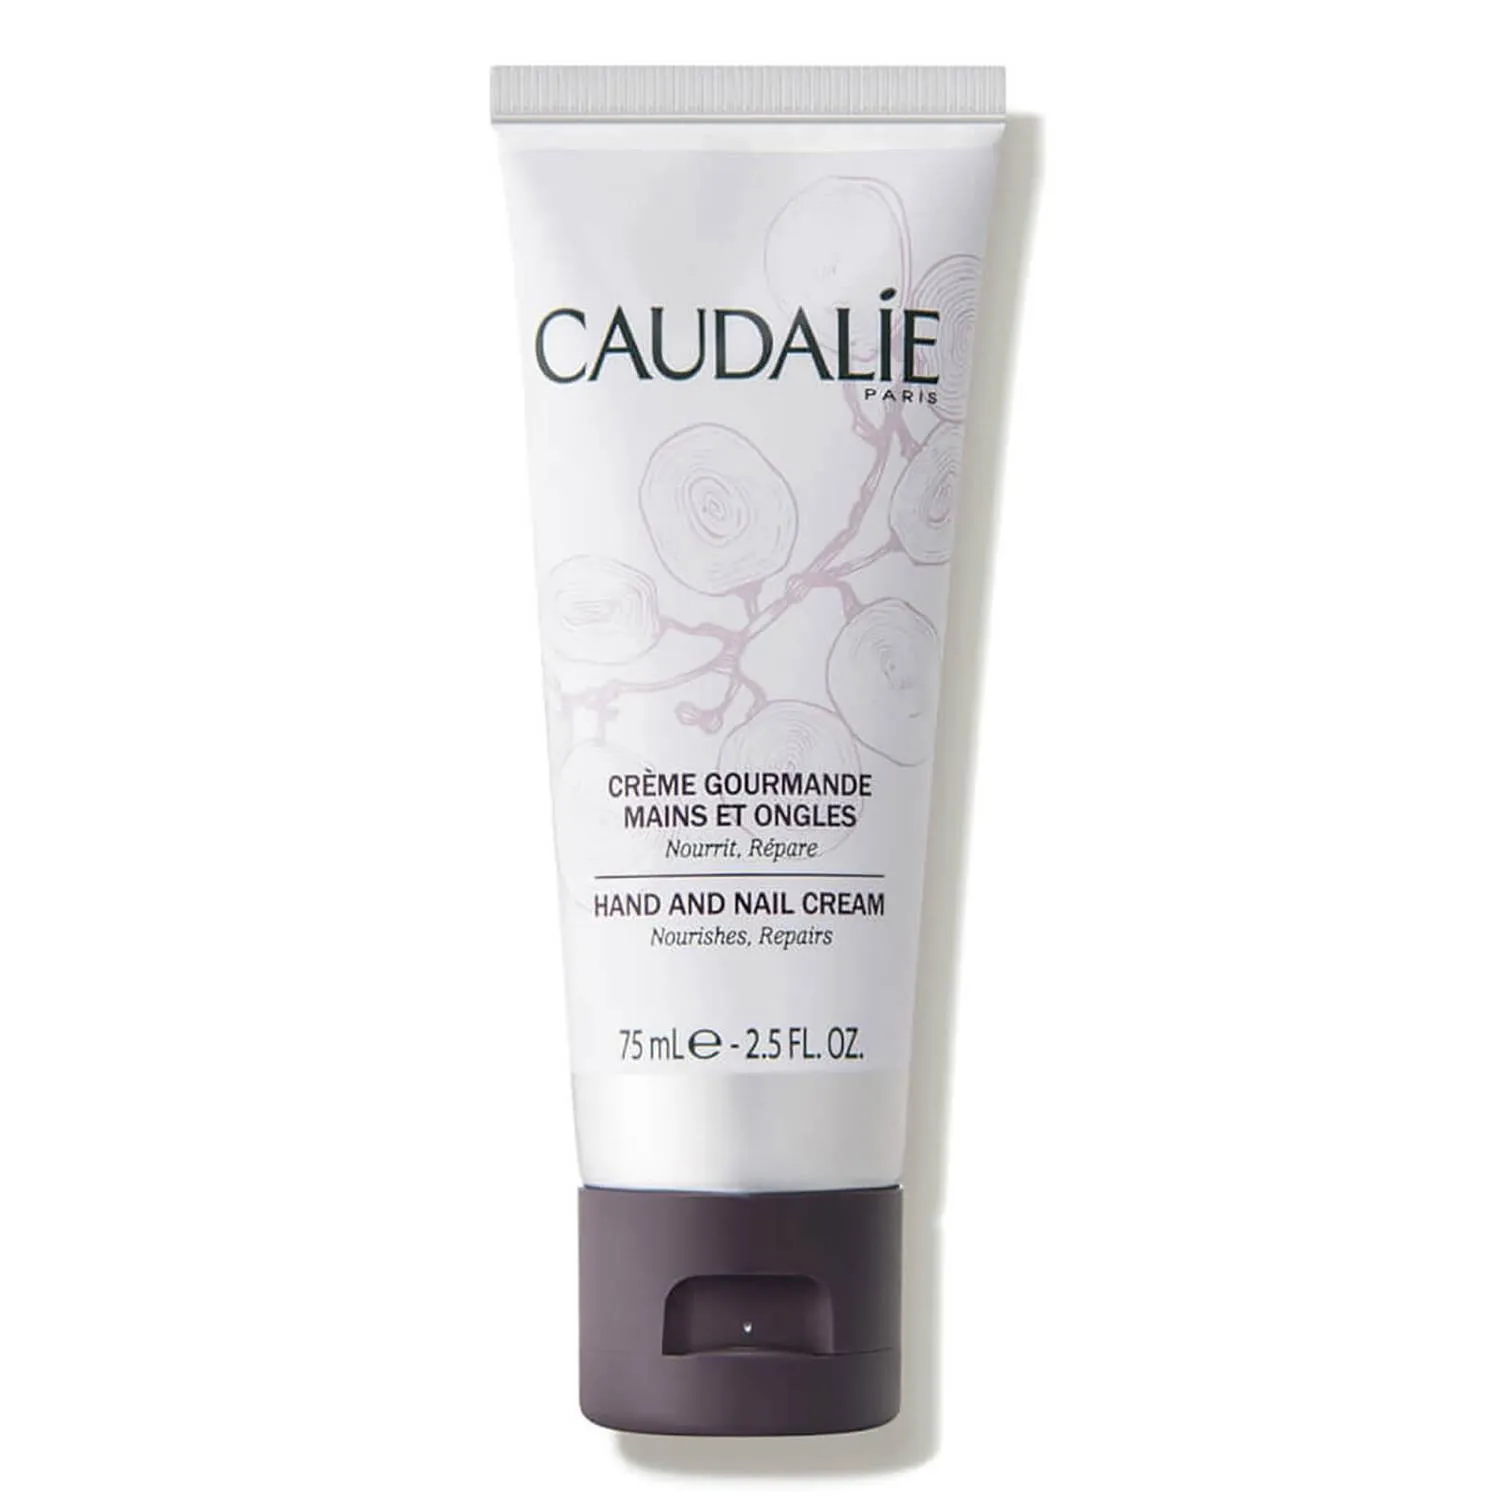 Nourishing and Protective Hand and Nail Cream by Caudalie, a nourishing, antioxidant French hand cream.